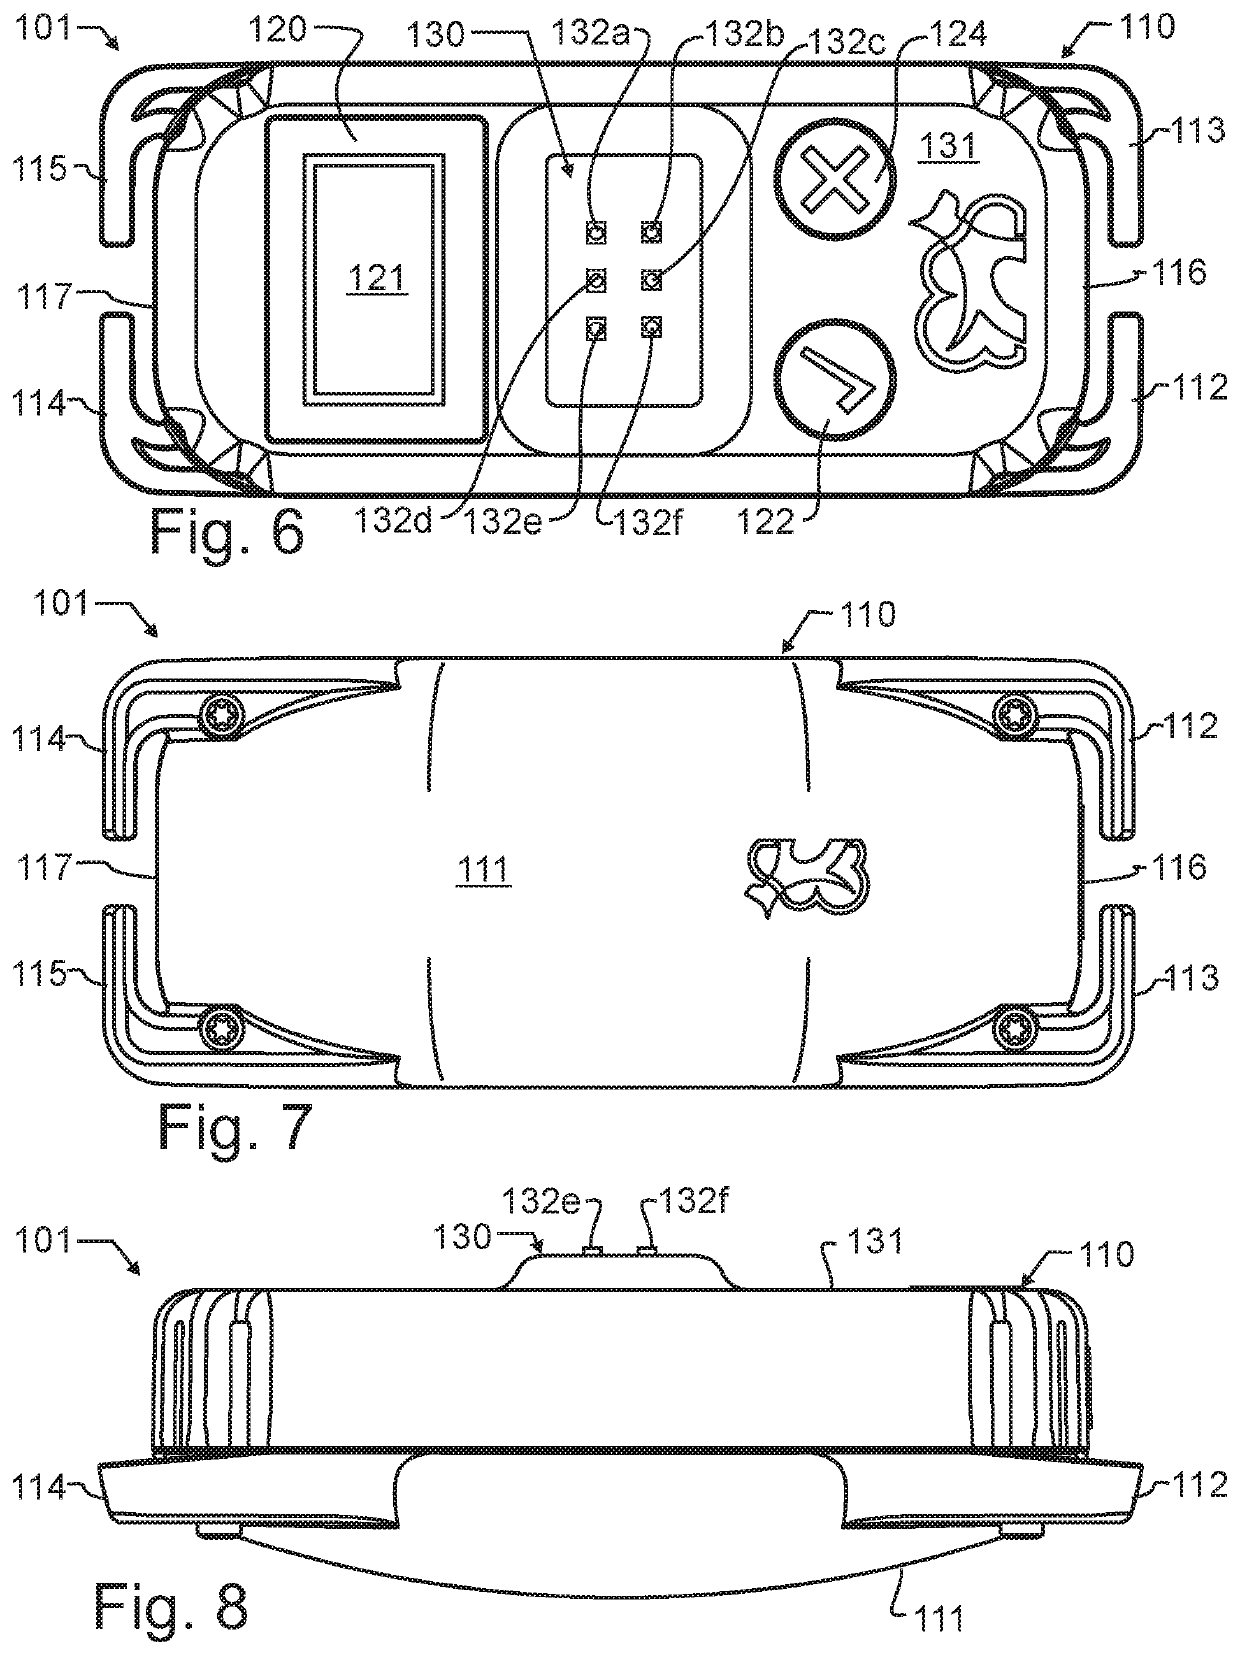 Wireless location assisted zone guidance system incorporating a rapid collar mount and non-necrotic stimulation